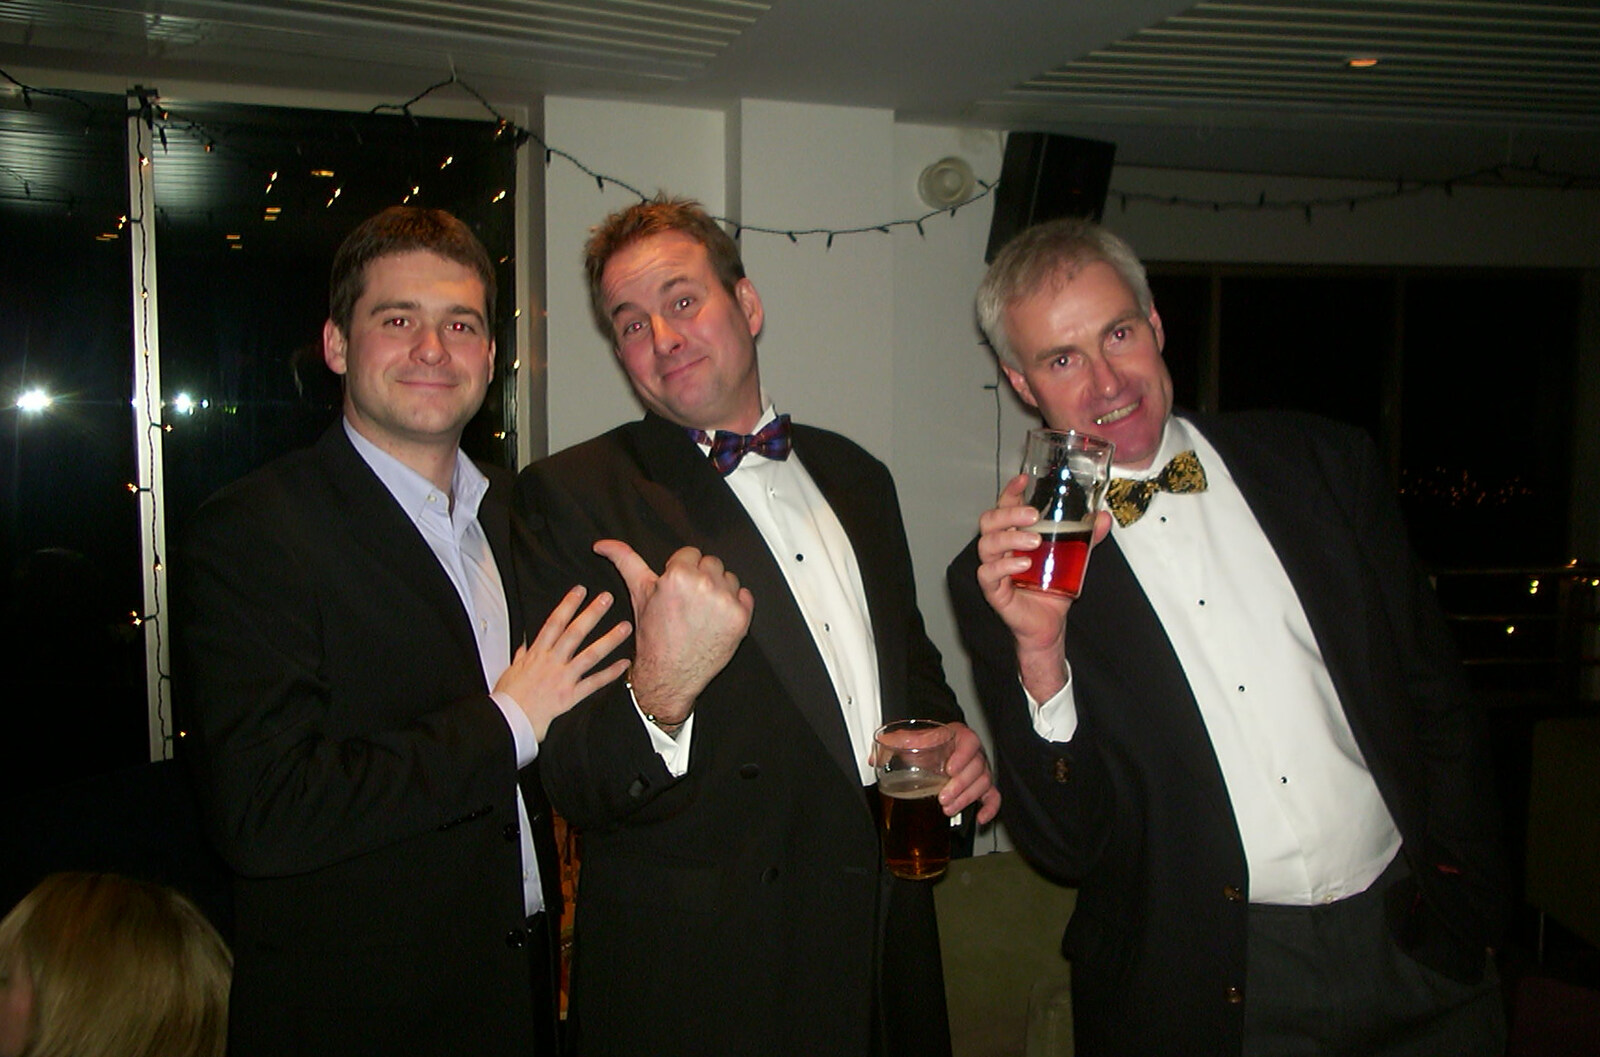 John Lucas, Peter Knowles and Andrew Clarke from 3G Lab Christmas Party, Q-Ton Centre, Cambridge - 23rd December 2002